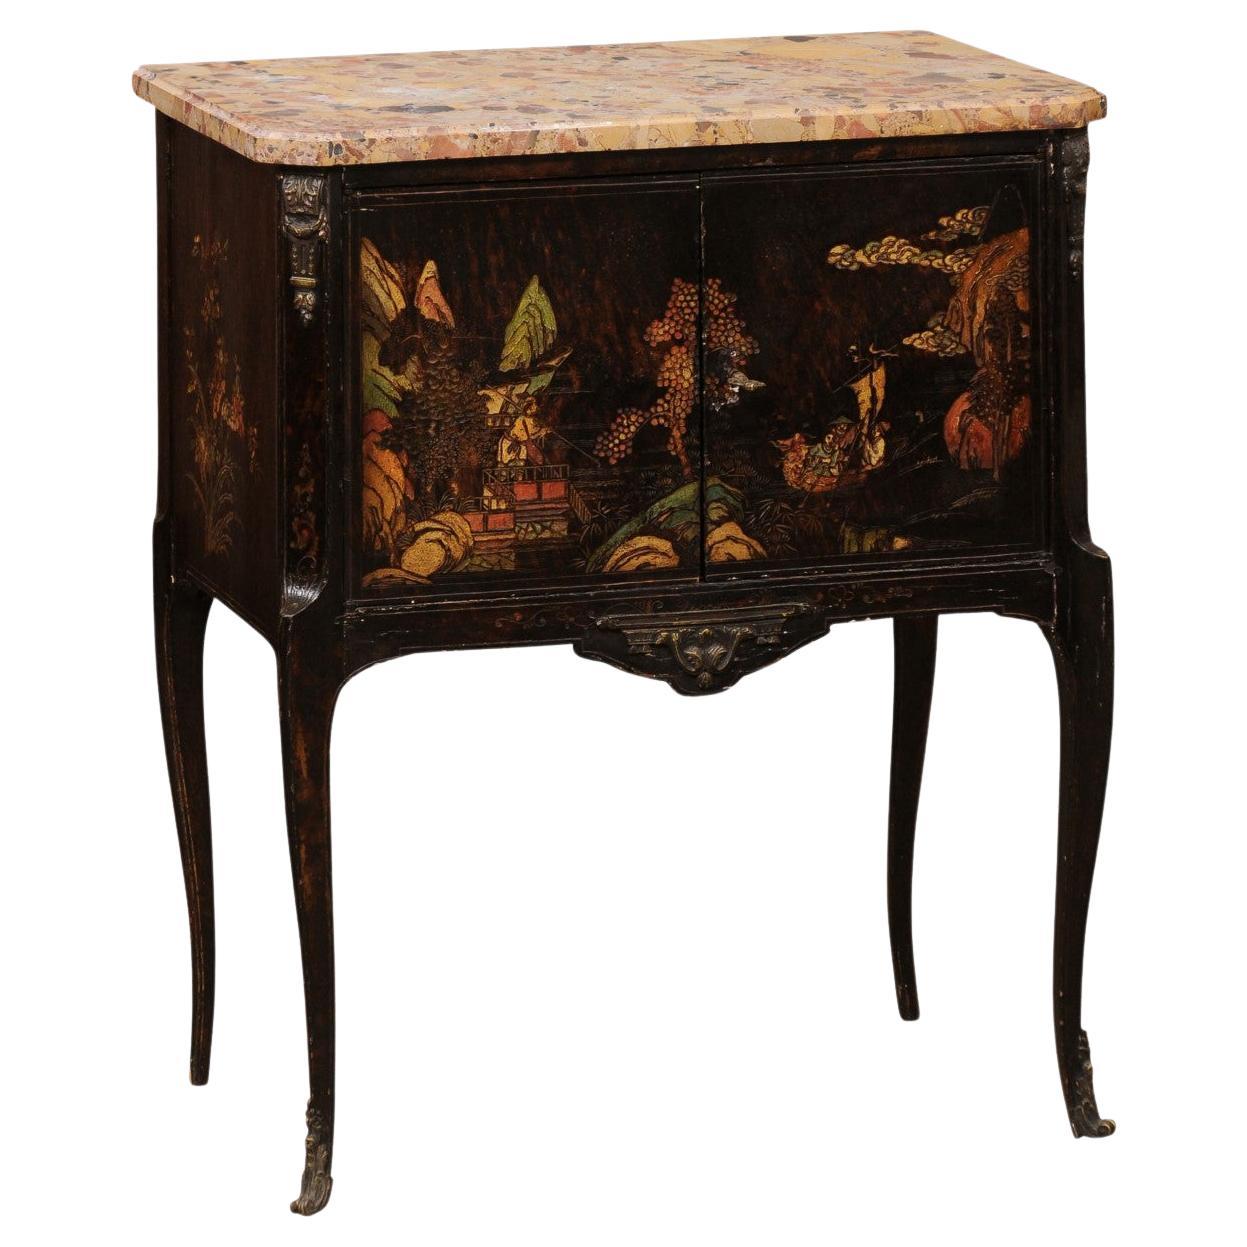  19th Century French Louis XVI Style Commode with Chinoserie Decoration  For Sale